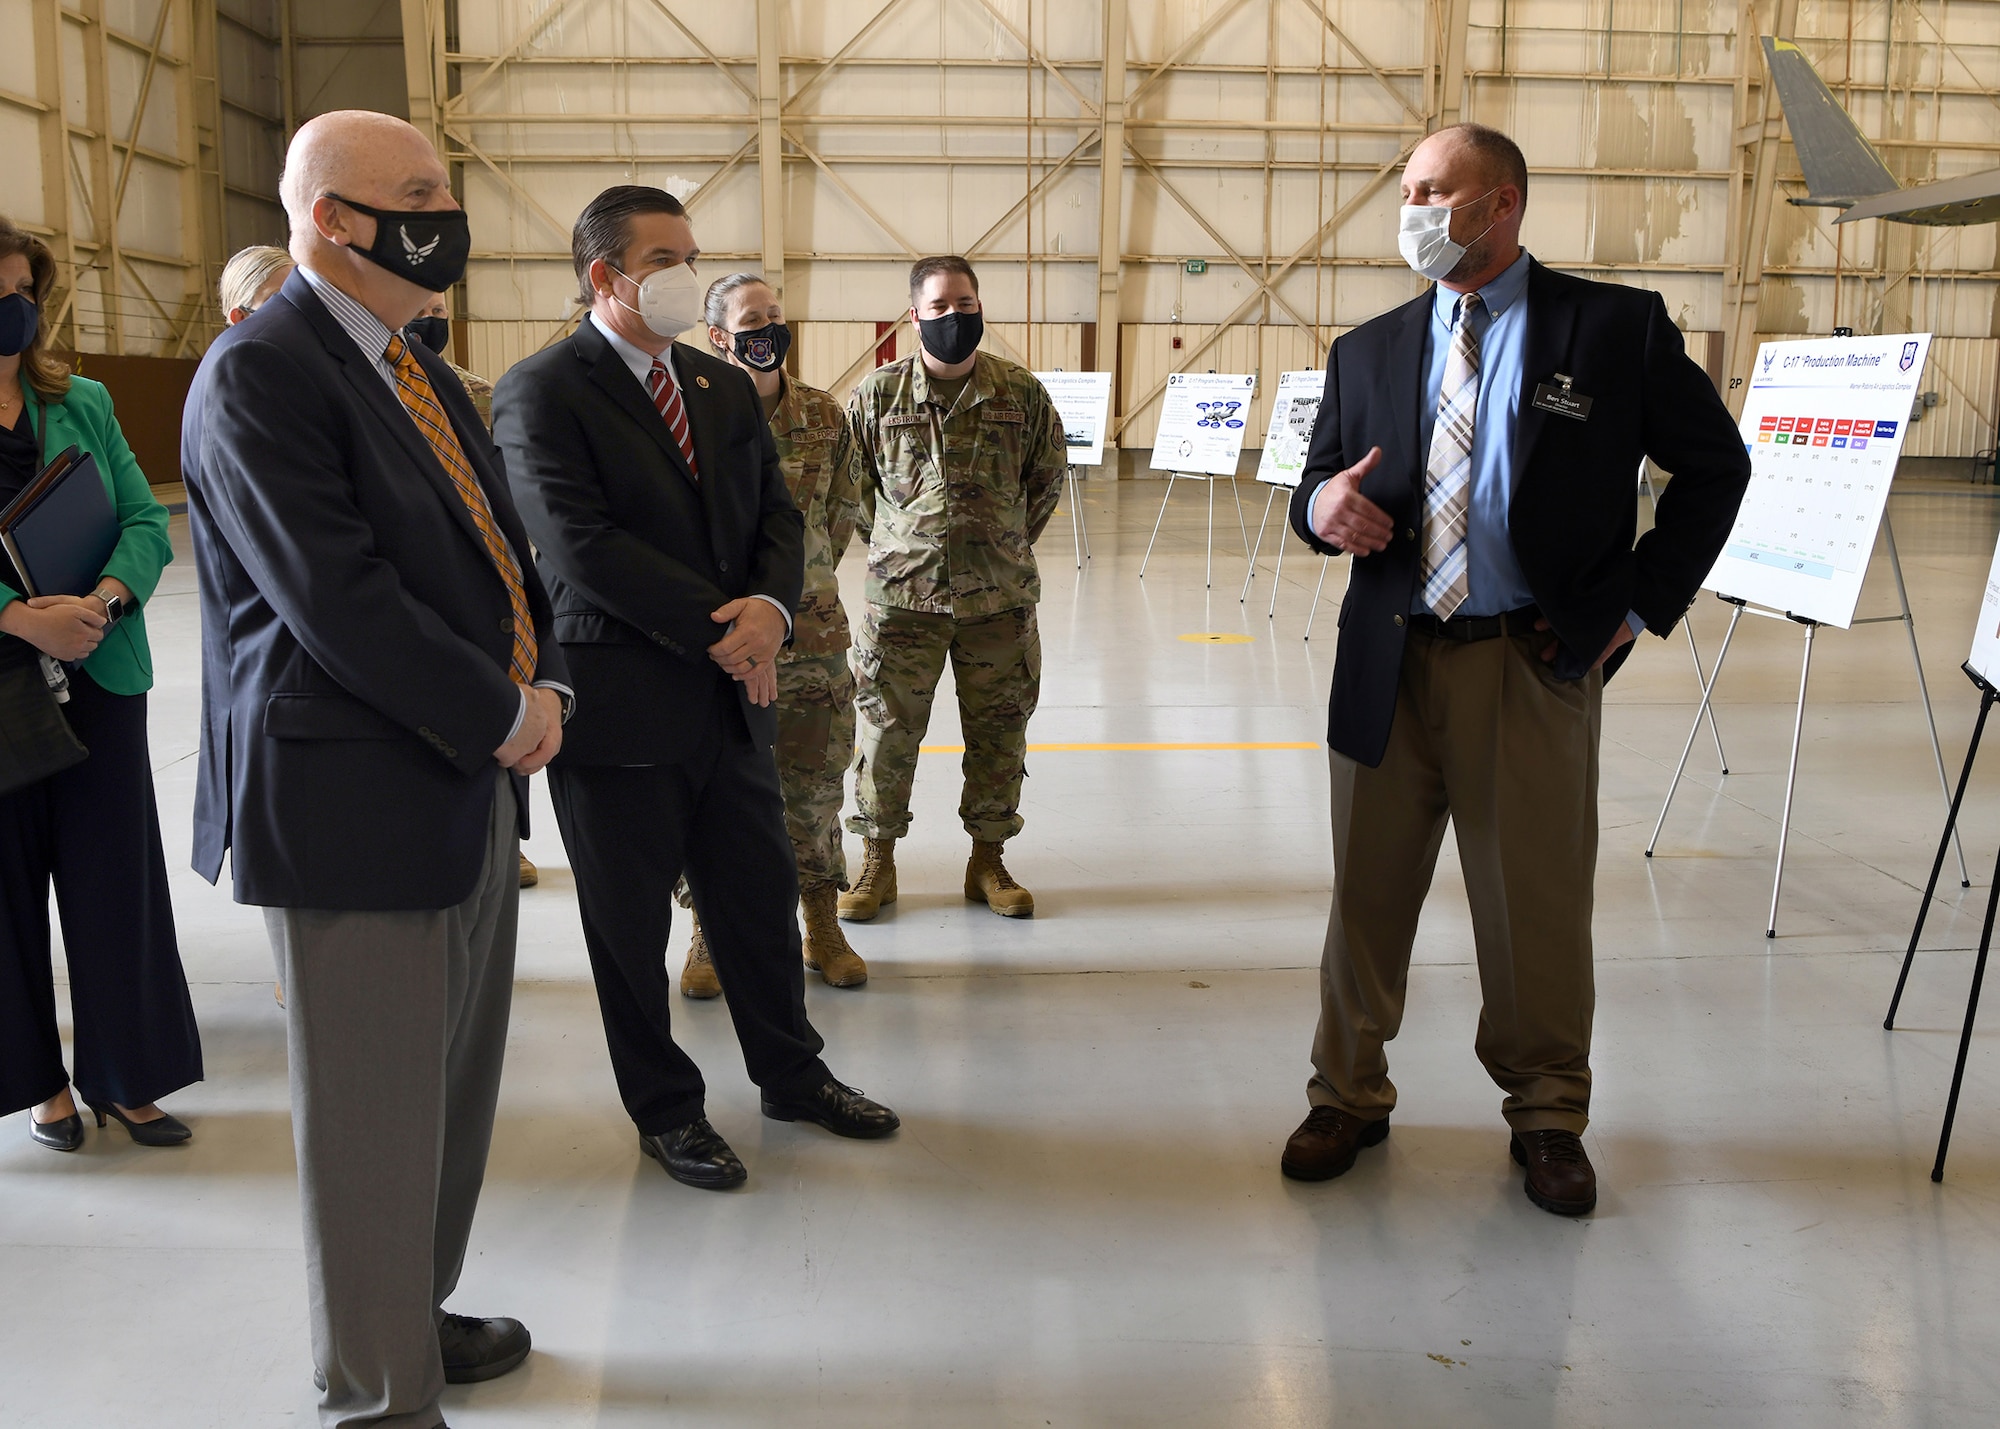 Ben Stuart, 562nd Aircraft Maintenance Squadron deputy director, briefs Acting Secretary of the Air Force John Roth on the C-17 Globemaster III sustainment mission at Robins Air Force Base, Ga., May 10, 2021. The 562nd AMXS, part of the Warner Robins Air Logistics Complex, performs programmed depot maintenance on legacy airframes to ensure the Air Force’s readiness for the future.